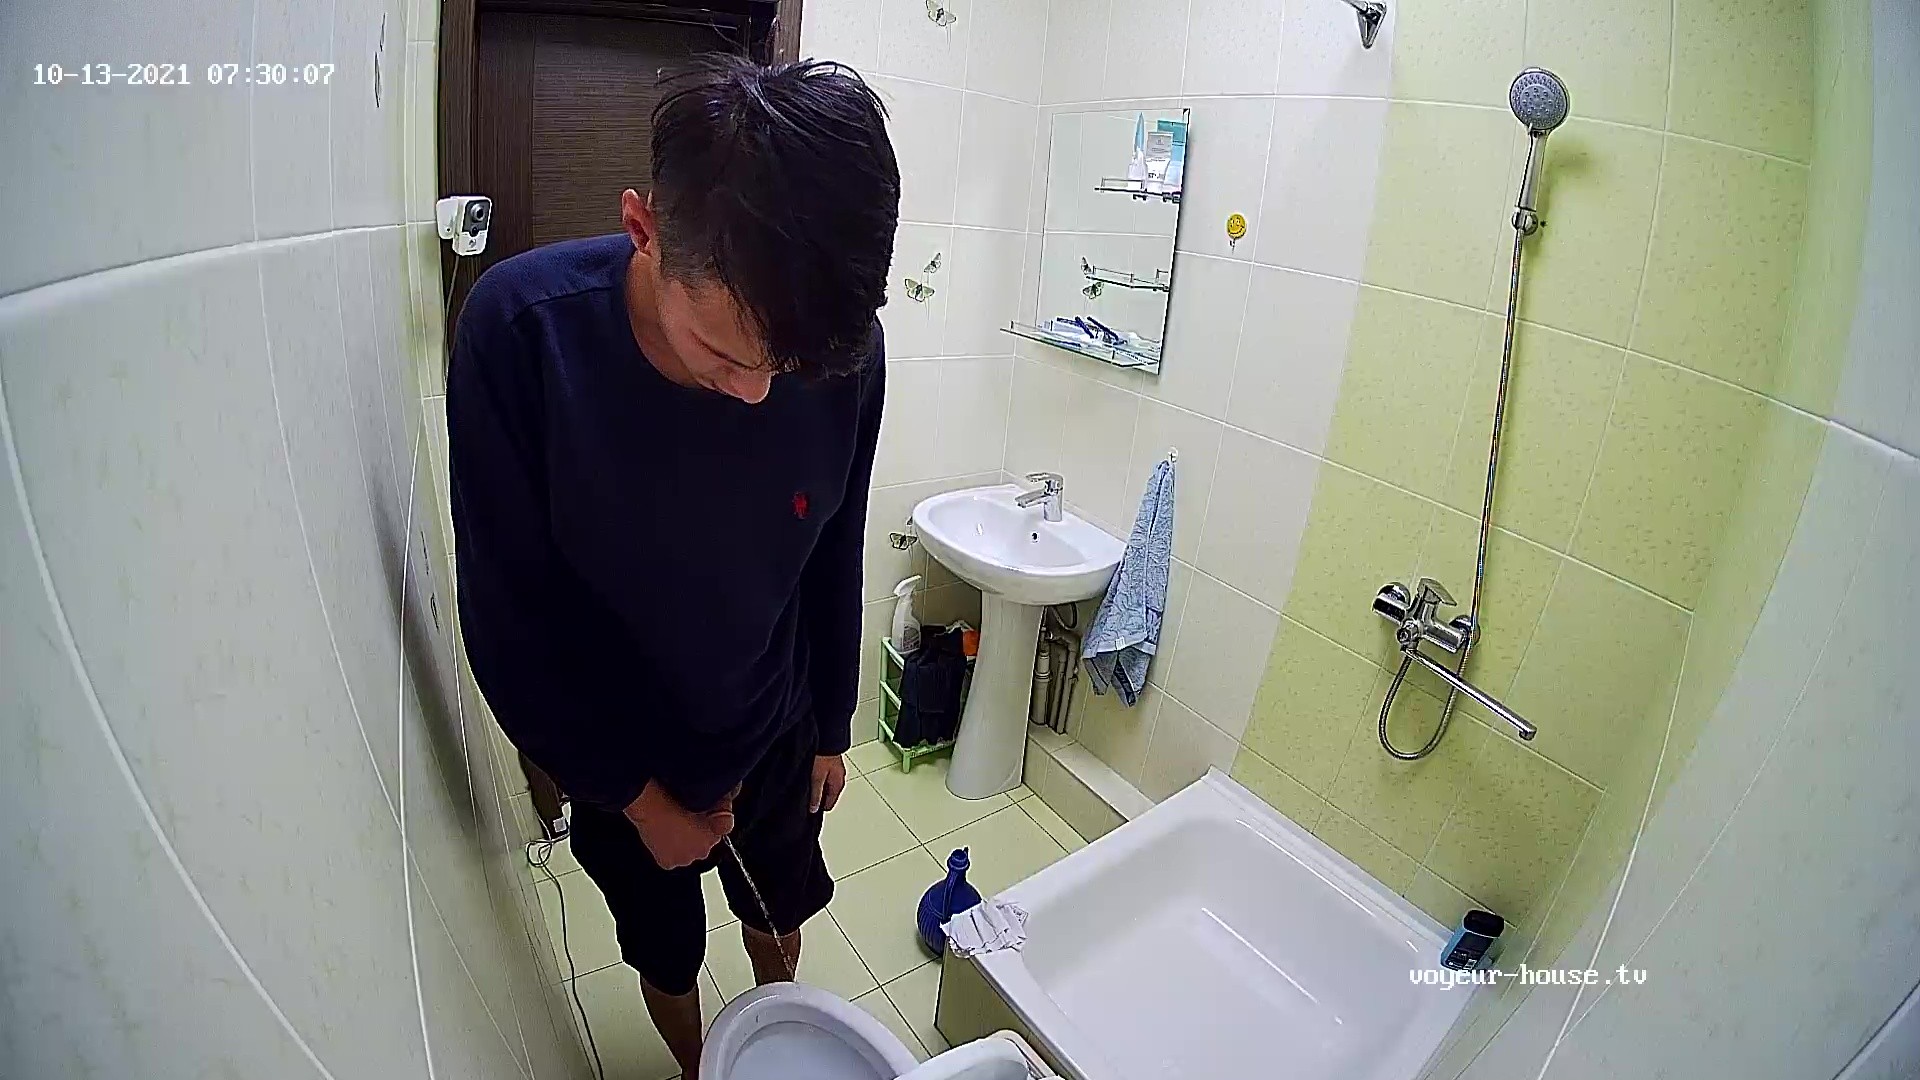 Denys peeing 13 Oct 2021 7.30am